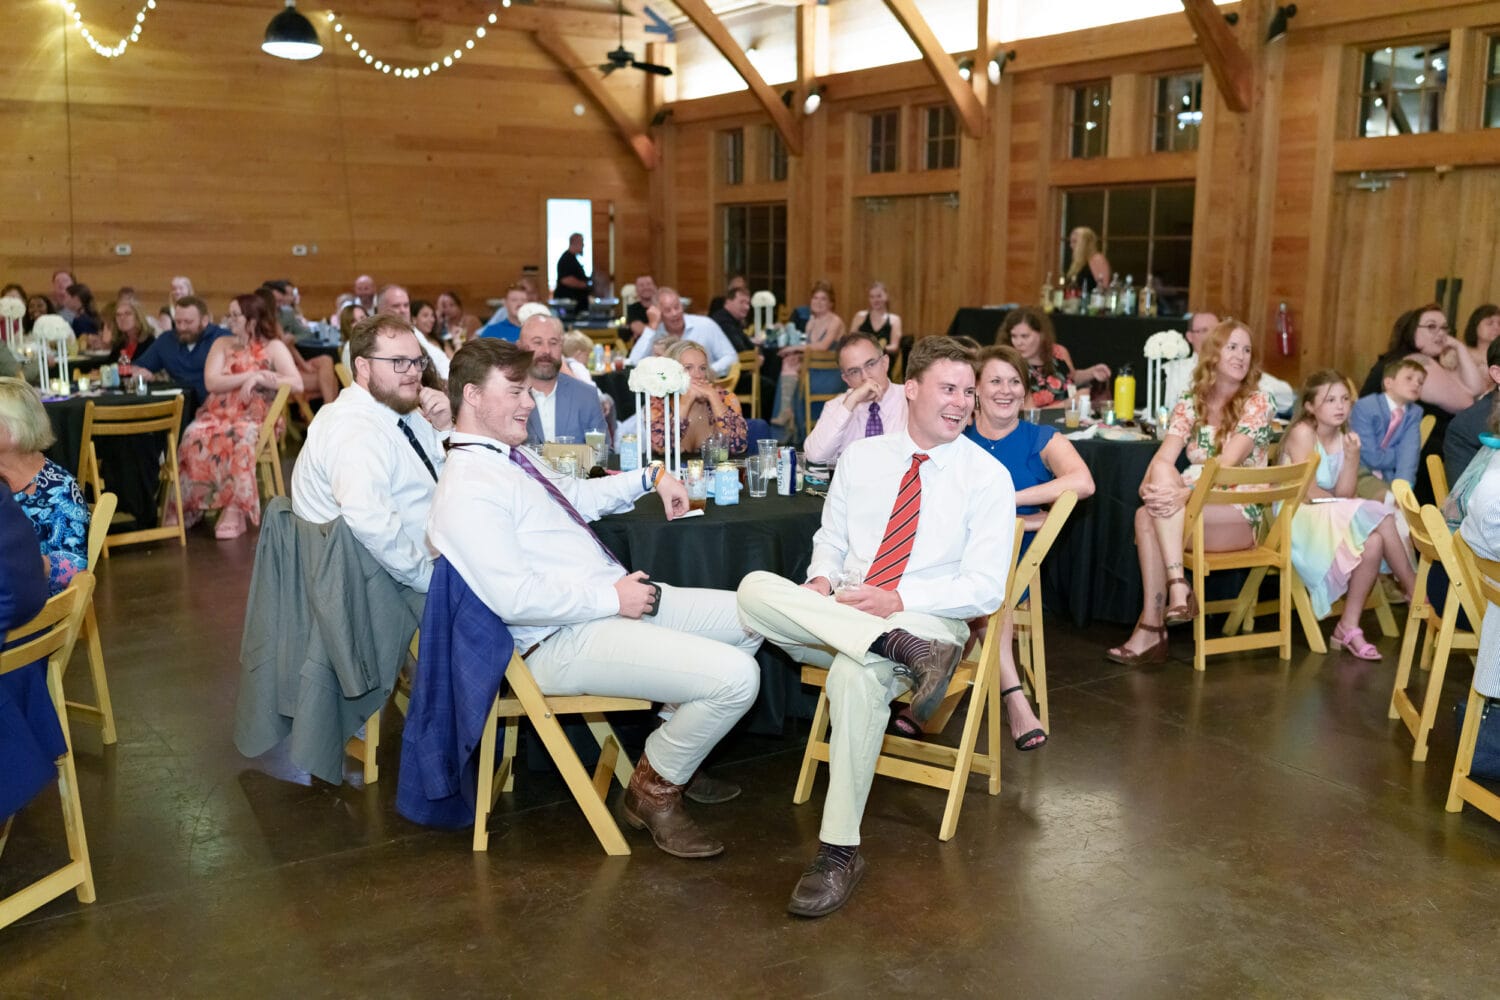 Laughs during the toasts - The Pavilion at Pepper Plantation